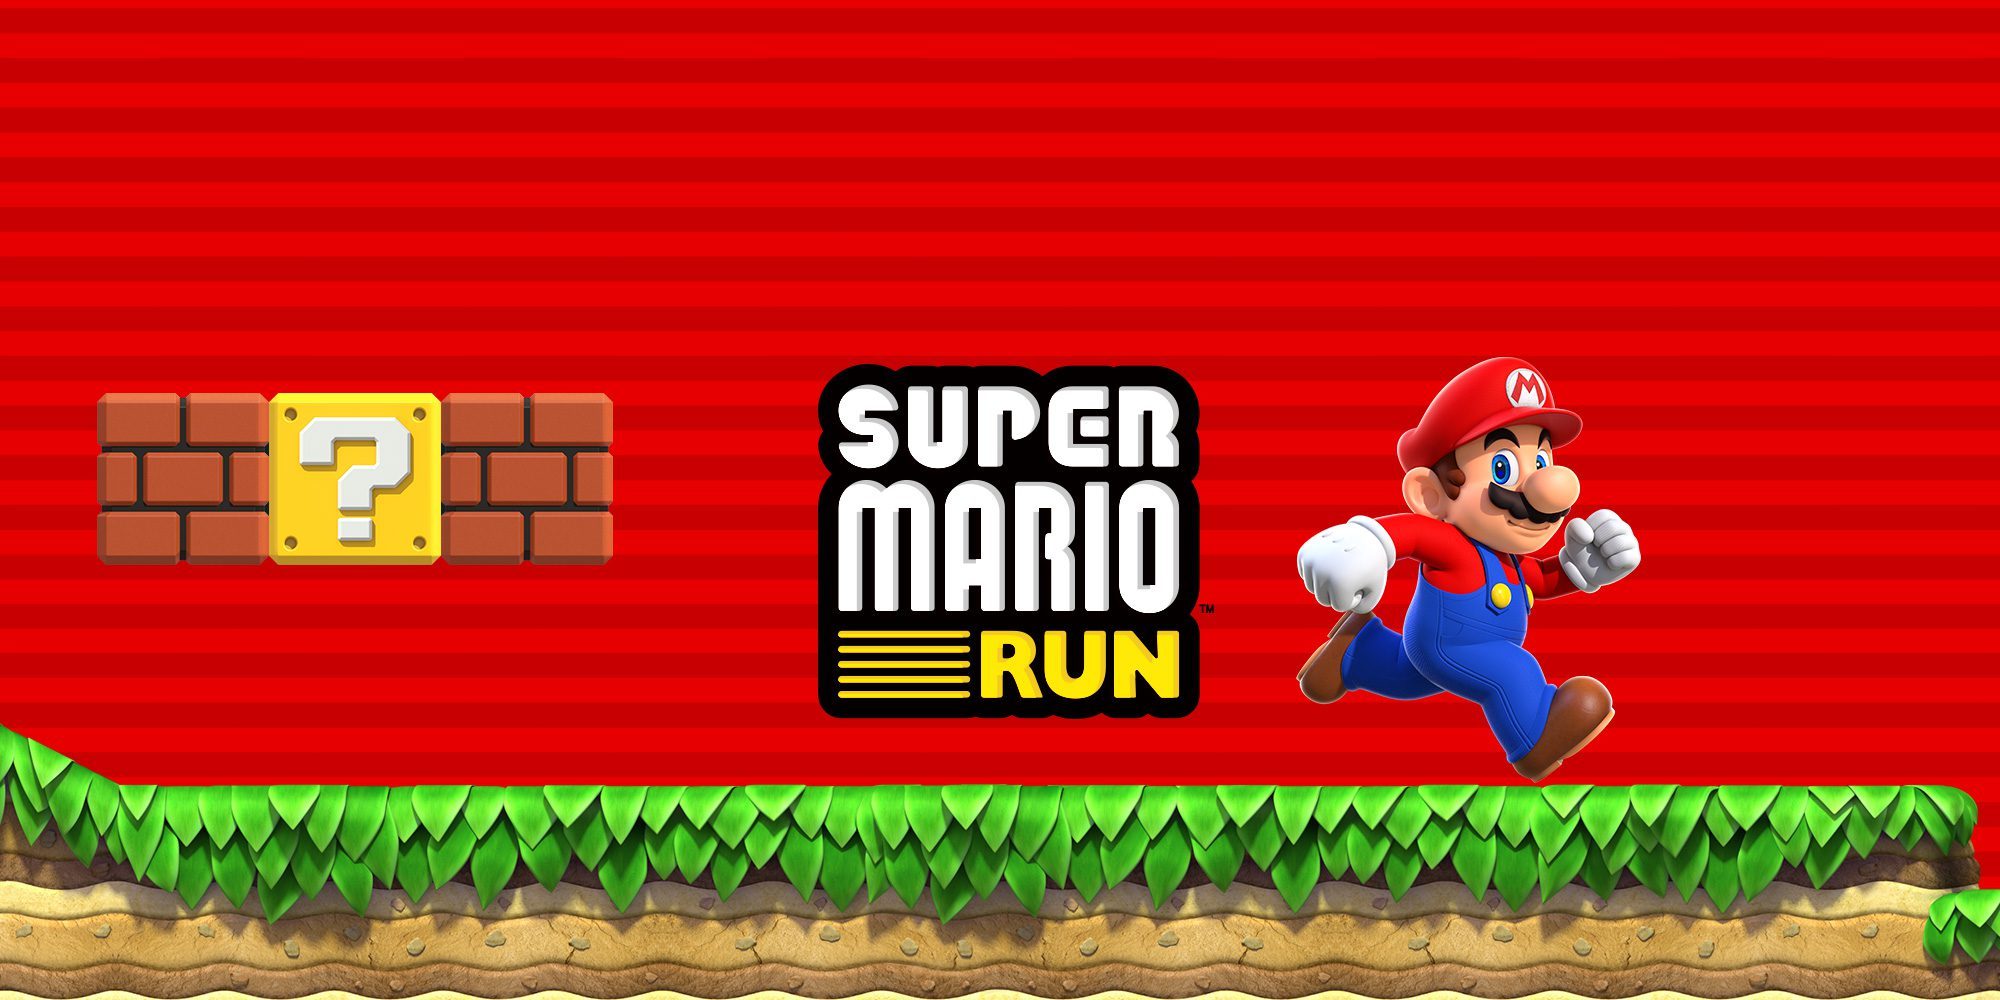 Super Mario Run Update to Bring new World and Characters, Temporary 50% Price Cut